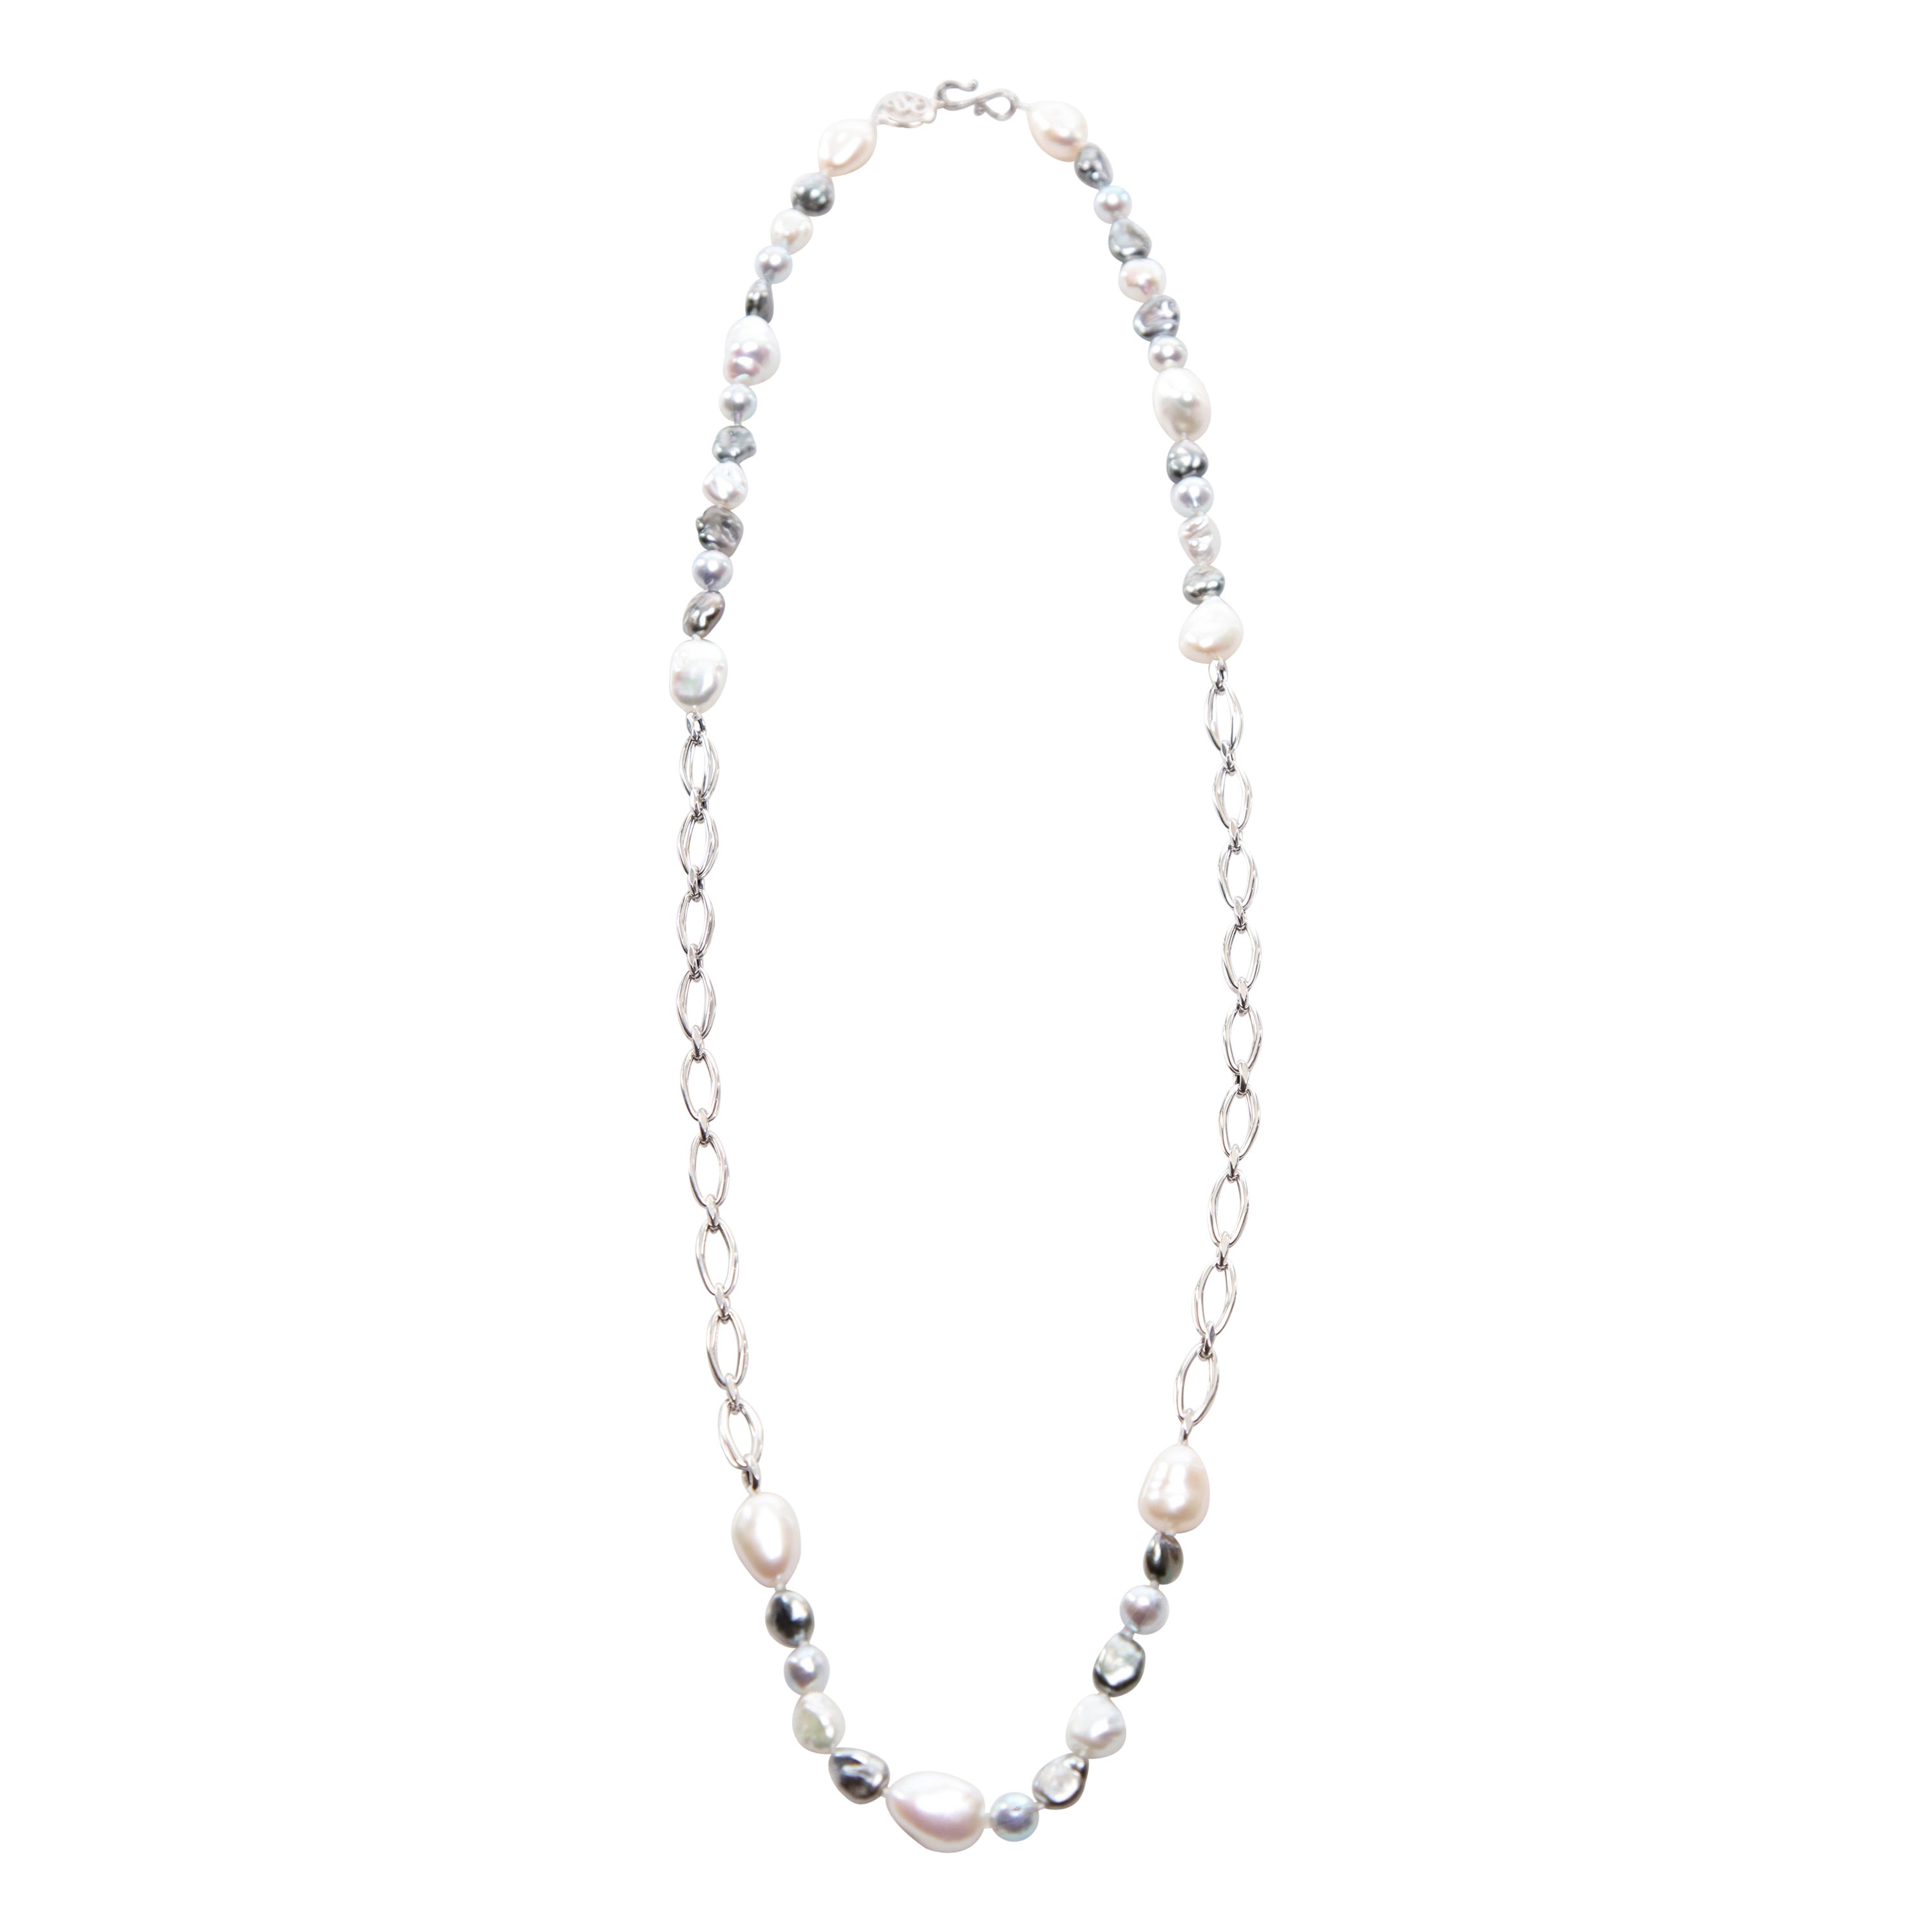 Akoya, Keshi, and South Sea Pearls on a White Gold Chain For Sale